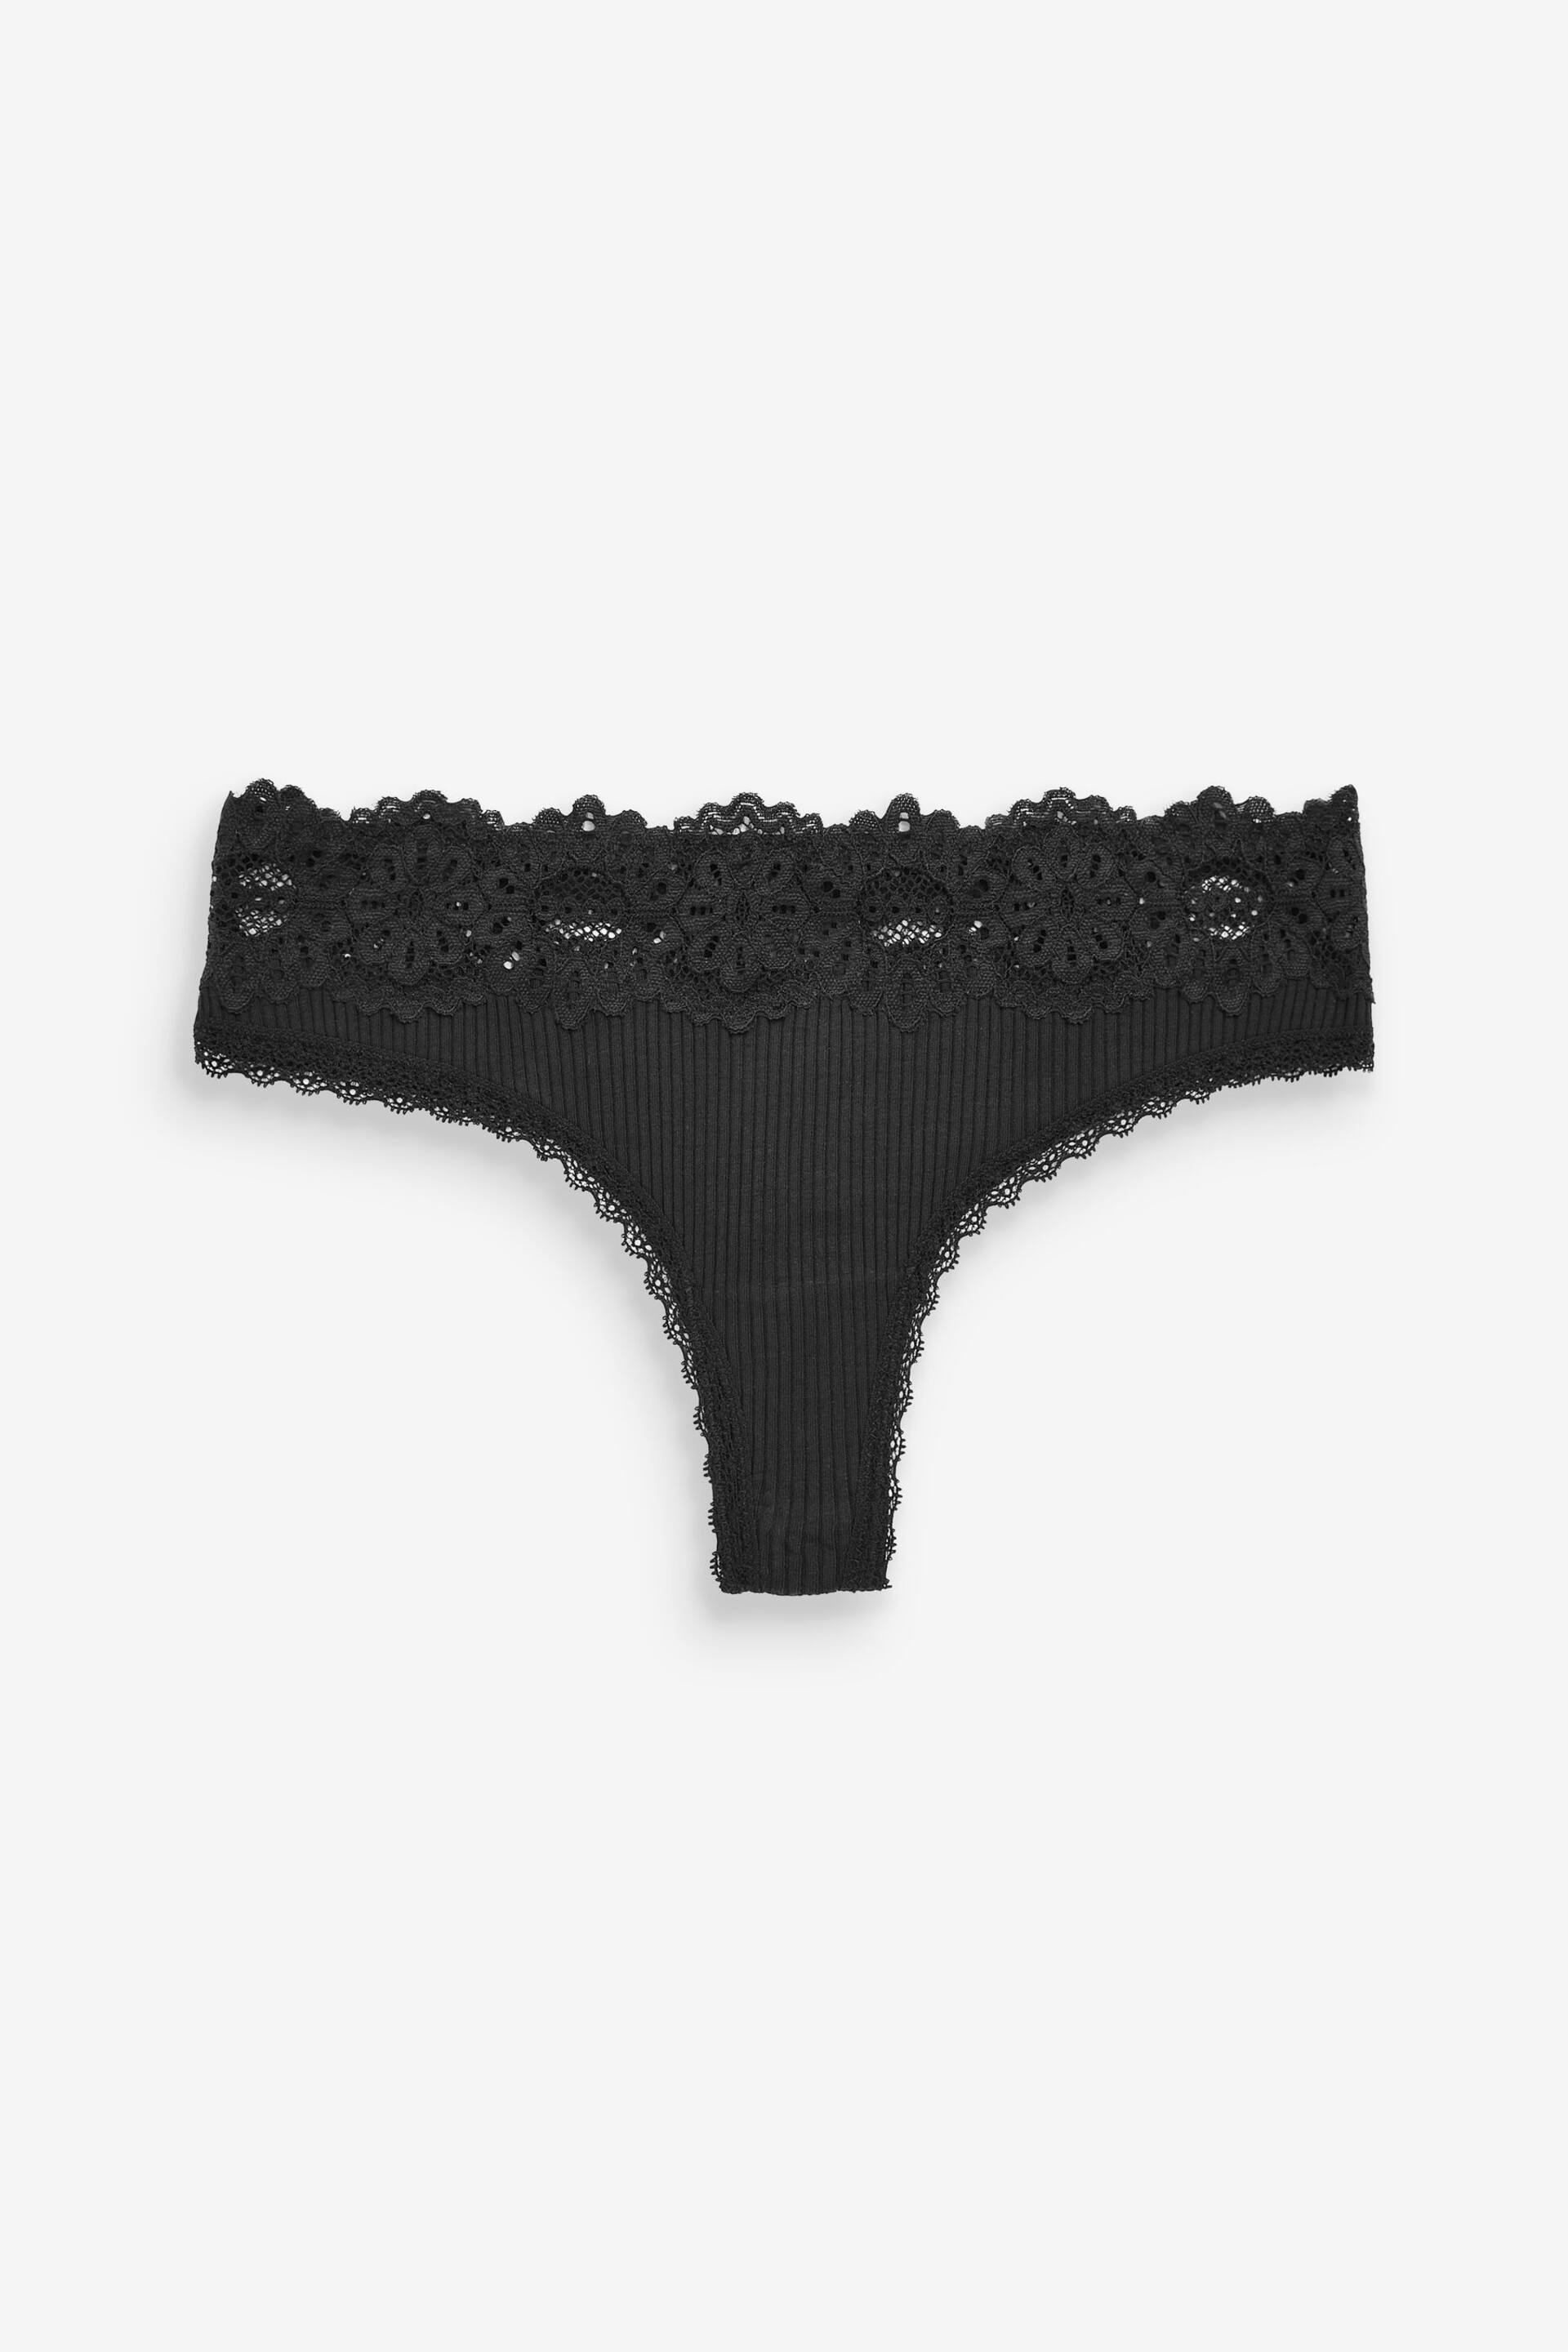 Black Thong Lace Top Rib Knickers 3 Pack - Image 7 of 8